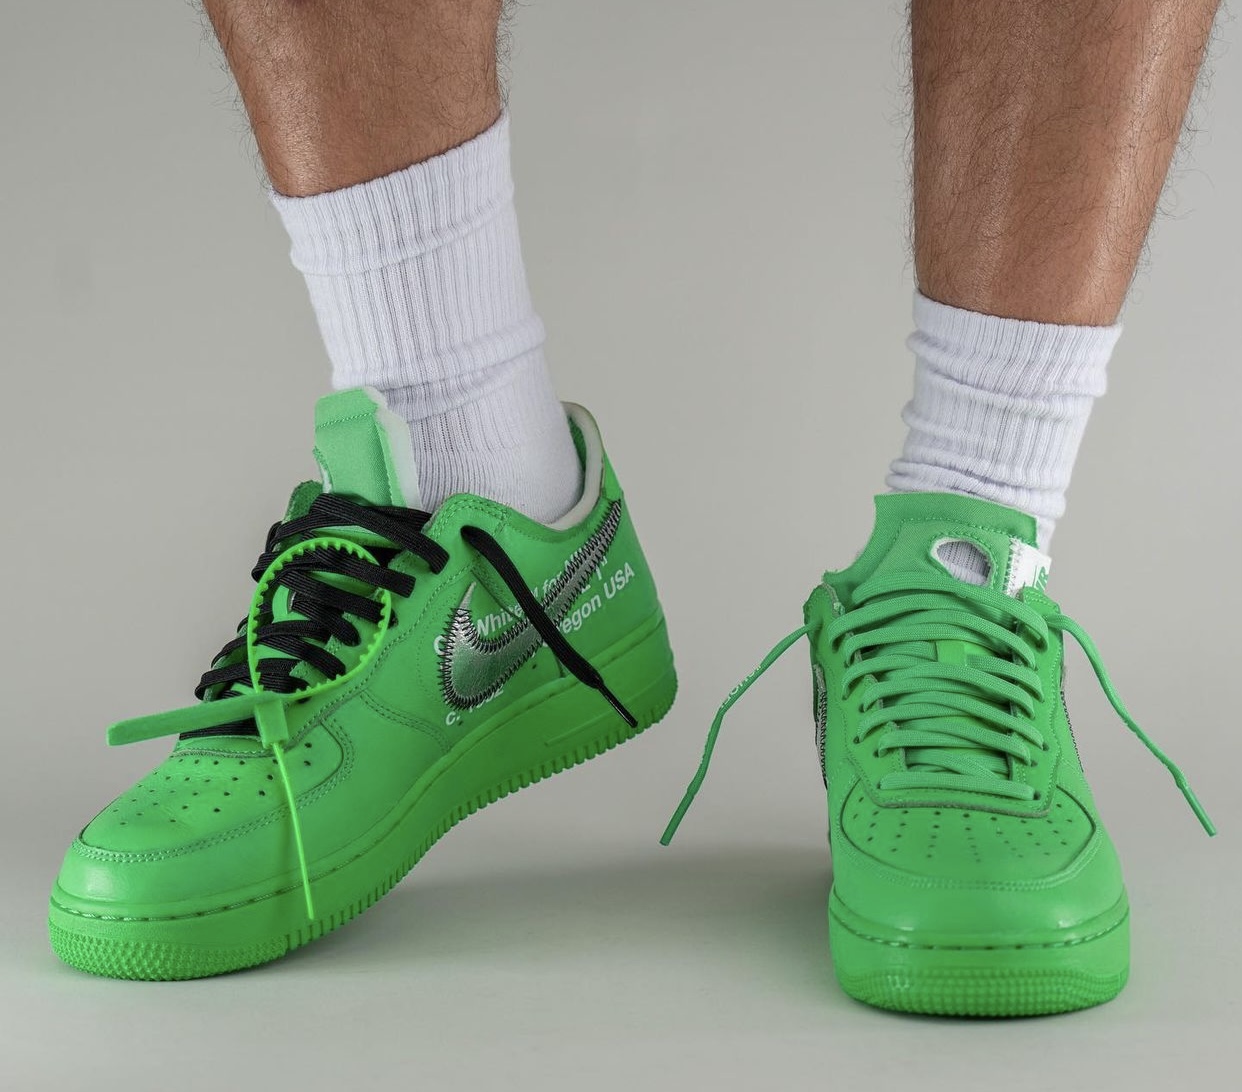 Off-White lime green air force 1 x Nike Air Force 1 Low Brooklyn DX1419-300 Release Date